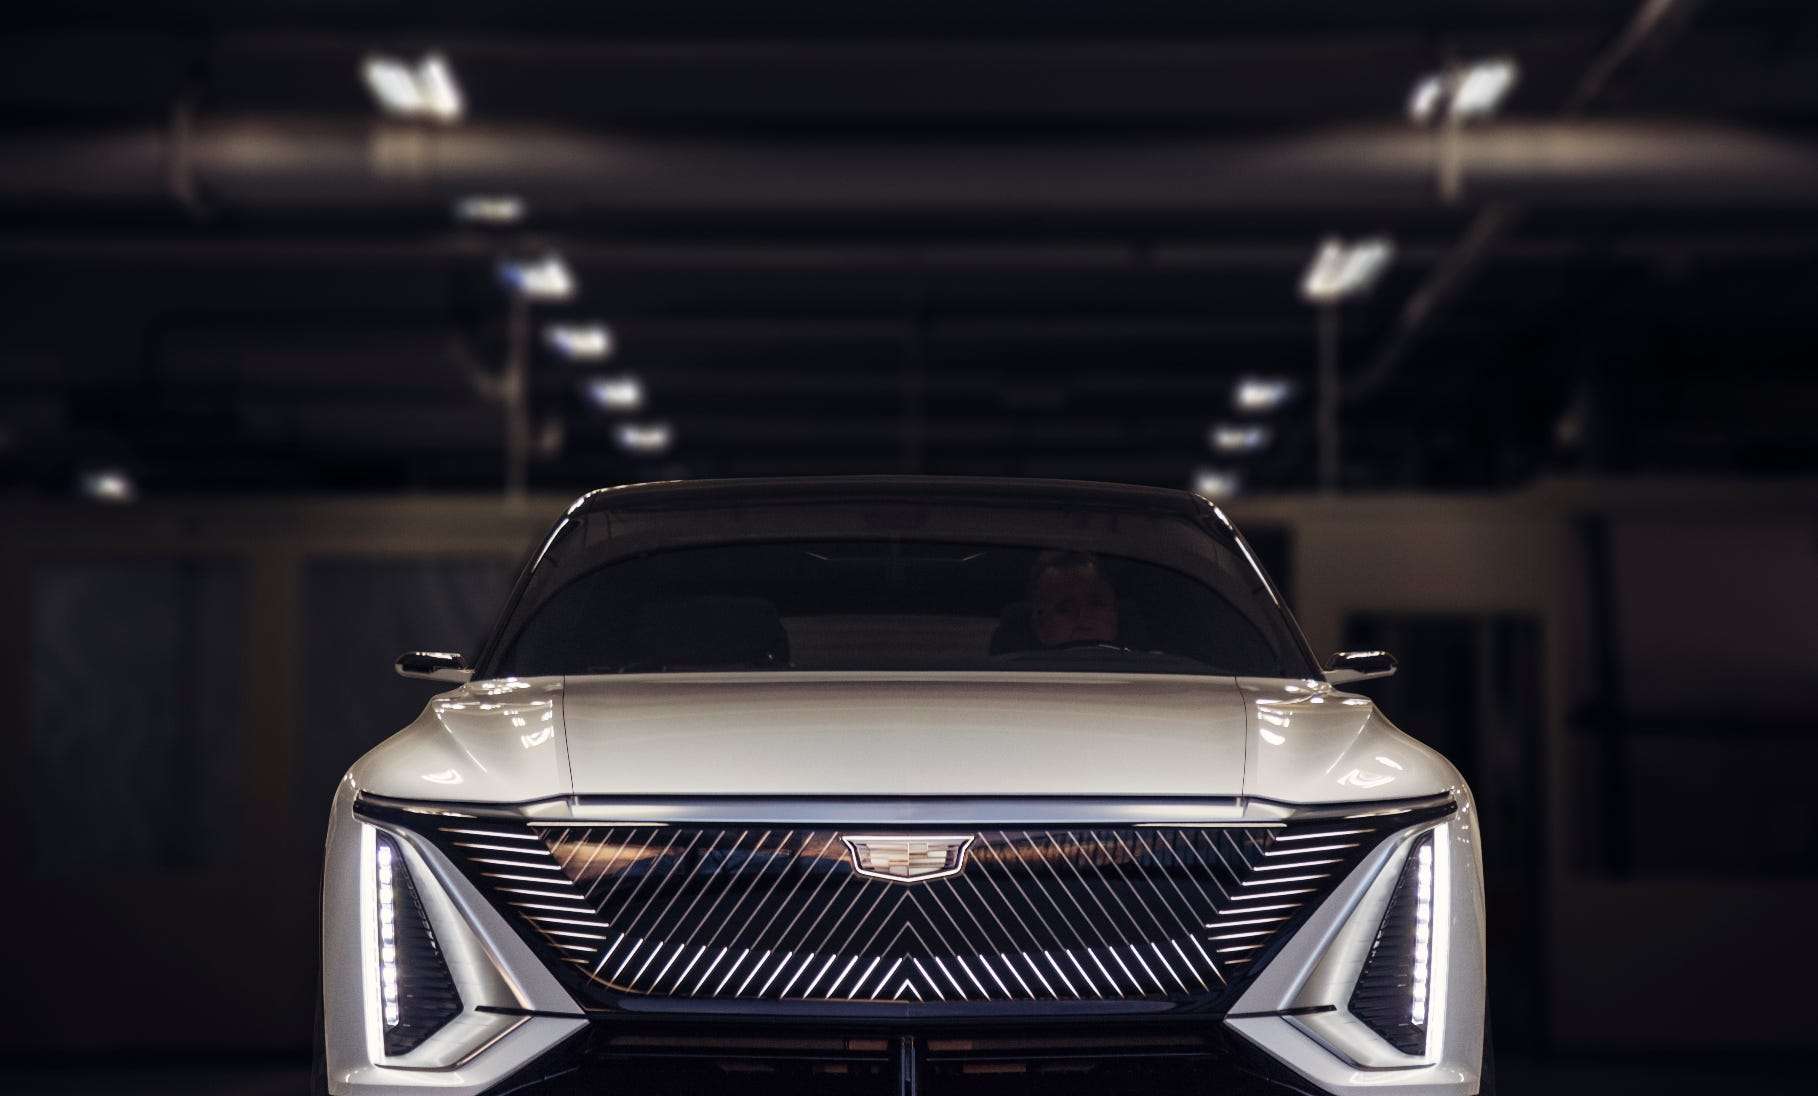 Cadillac just unveiled its Lyriq electric car — the first allelectric